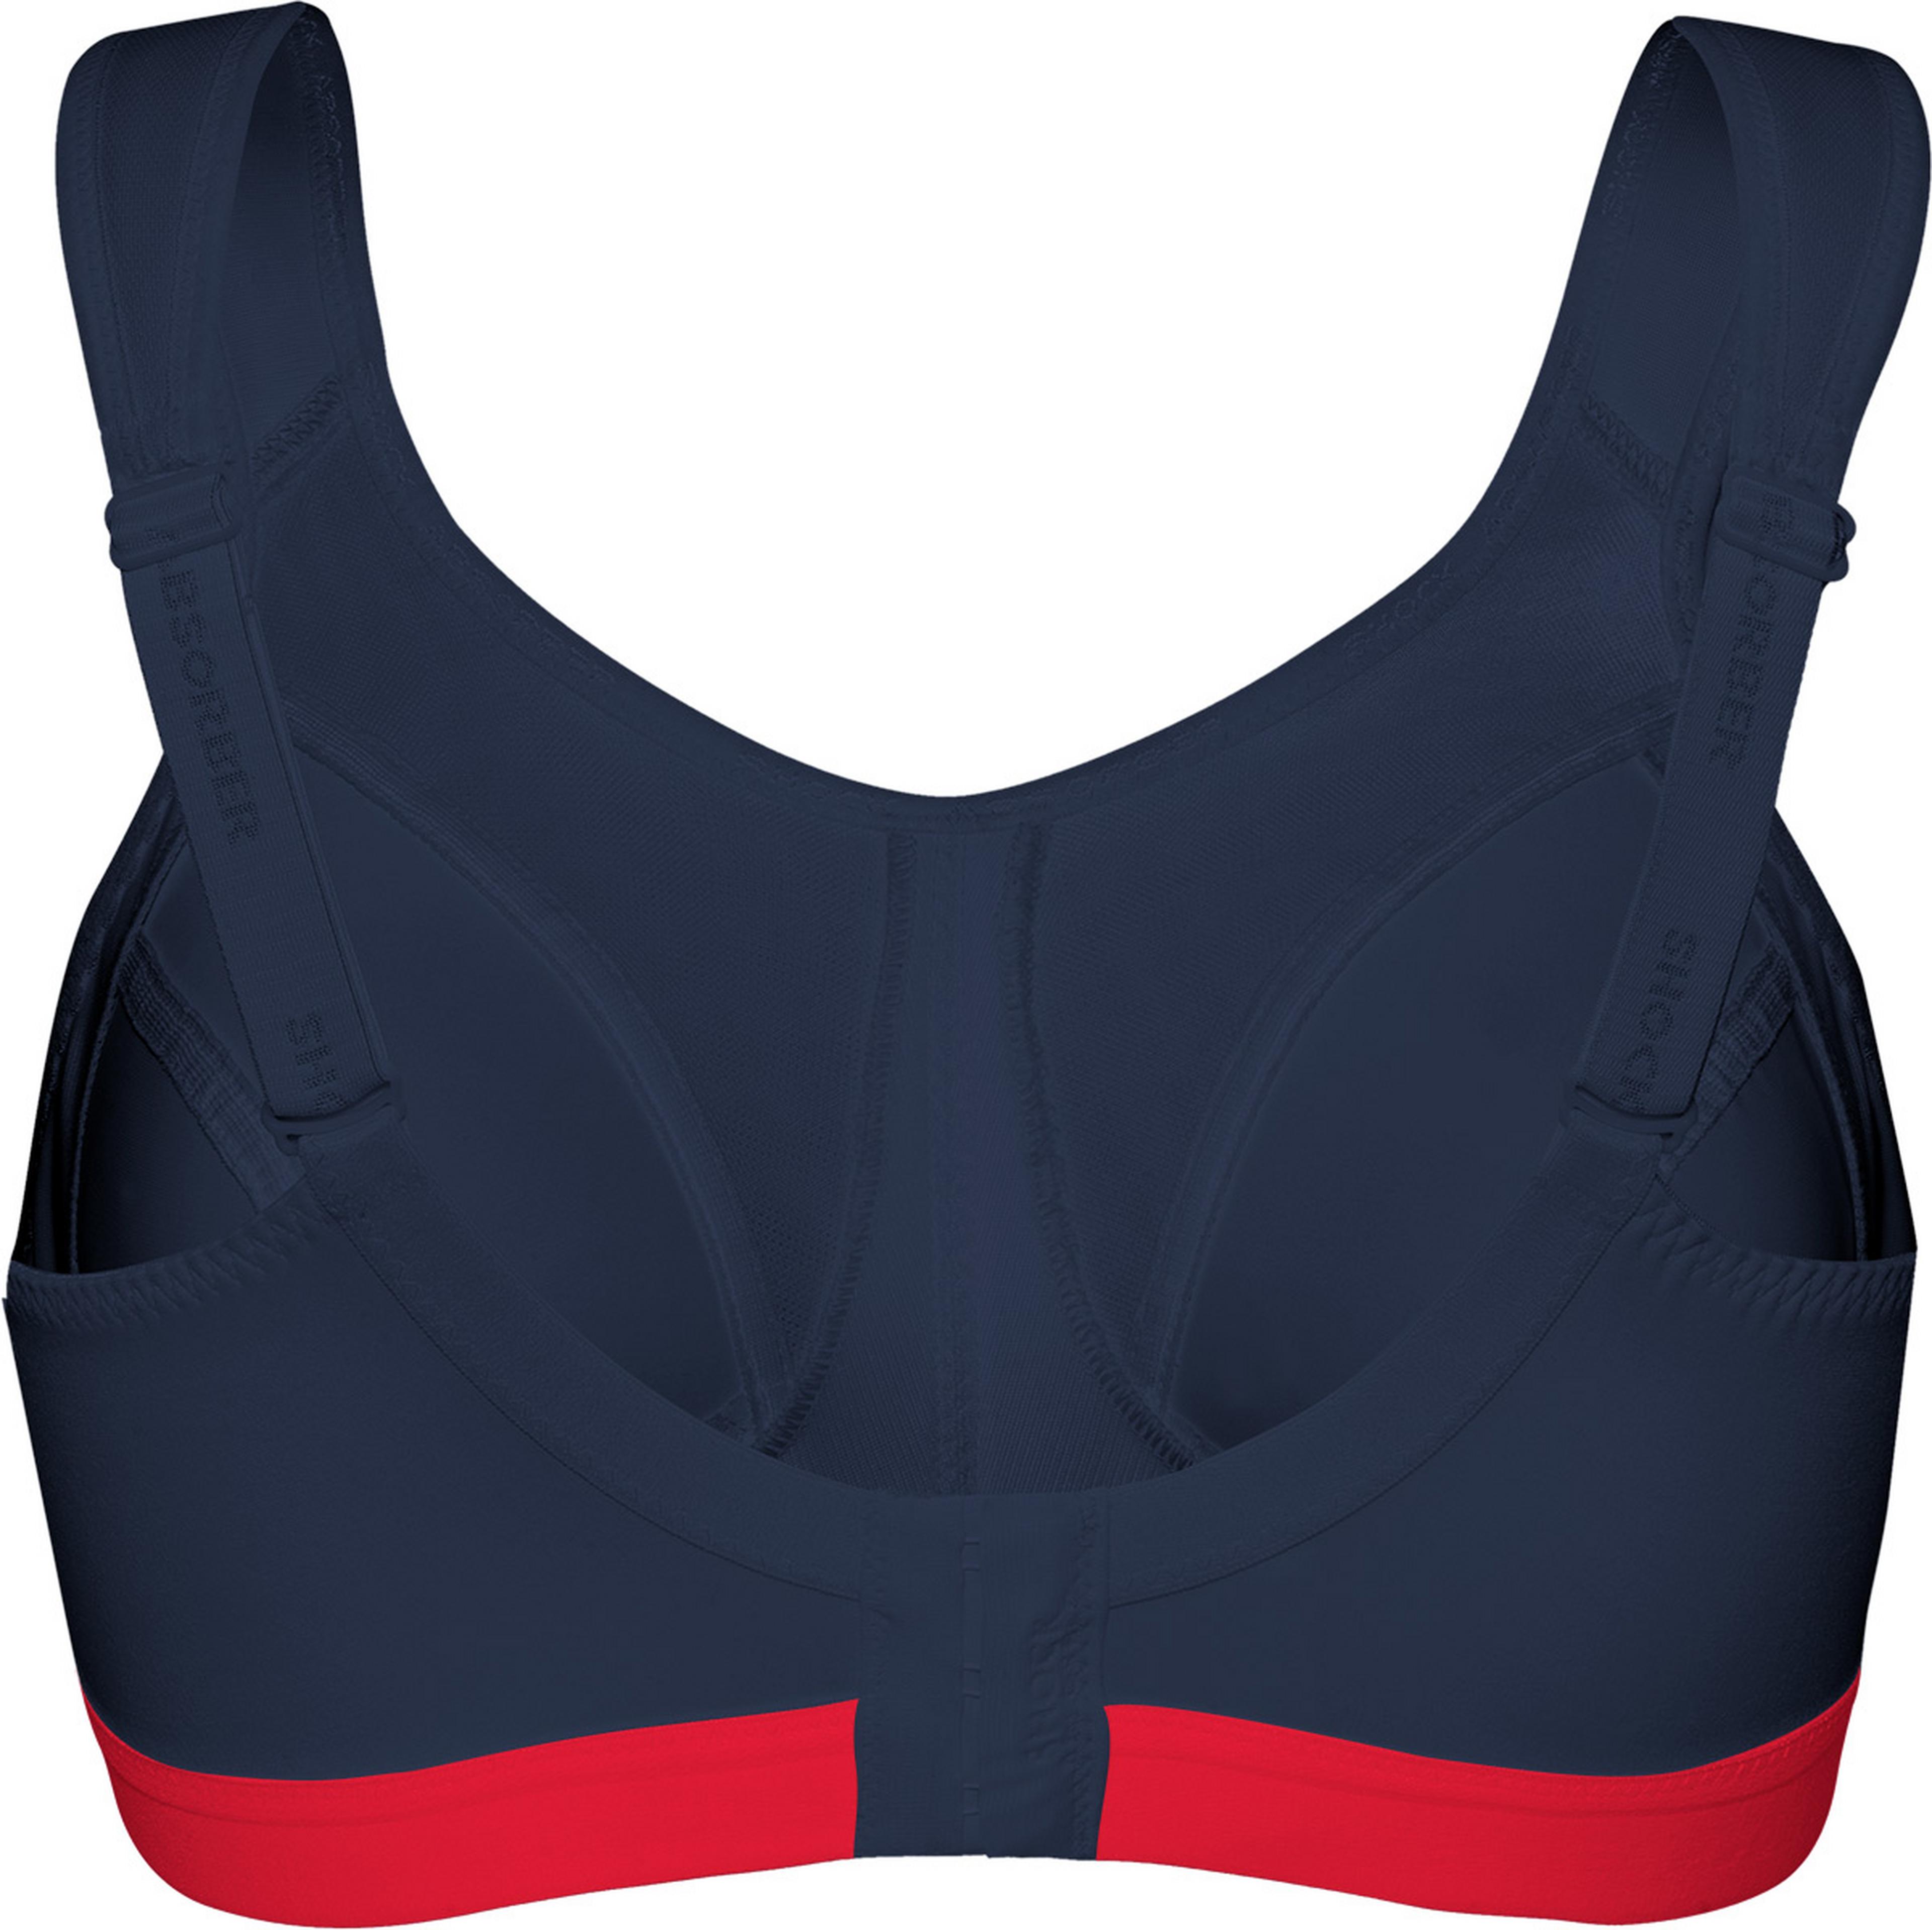 You D+ Bra May Fit, But Does It Have the Profile of a Heavy Lifter? –